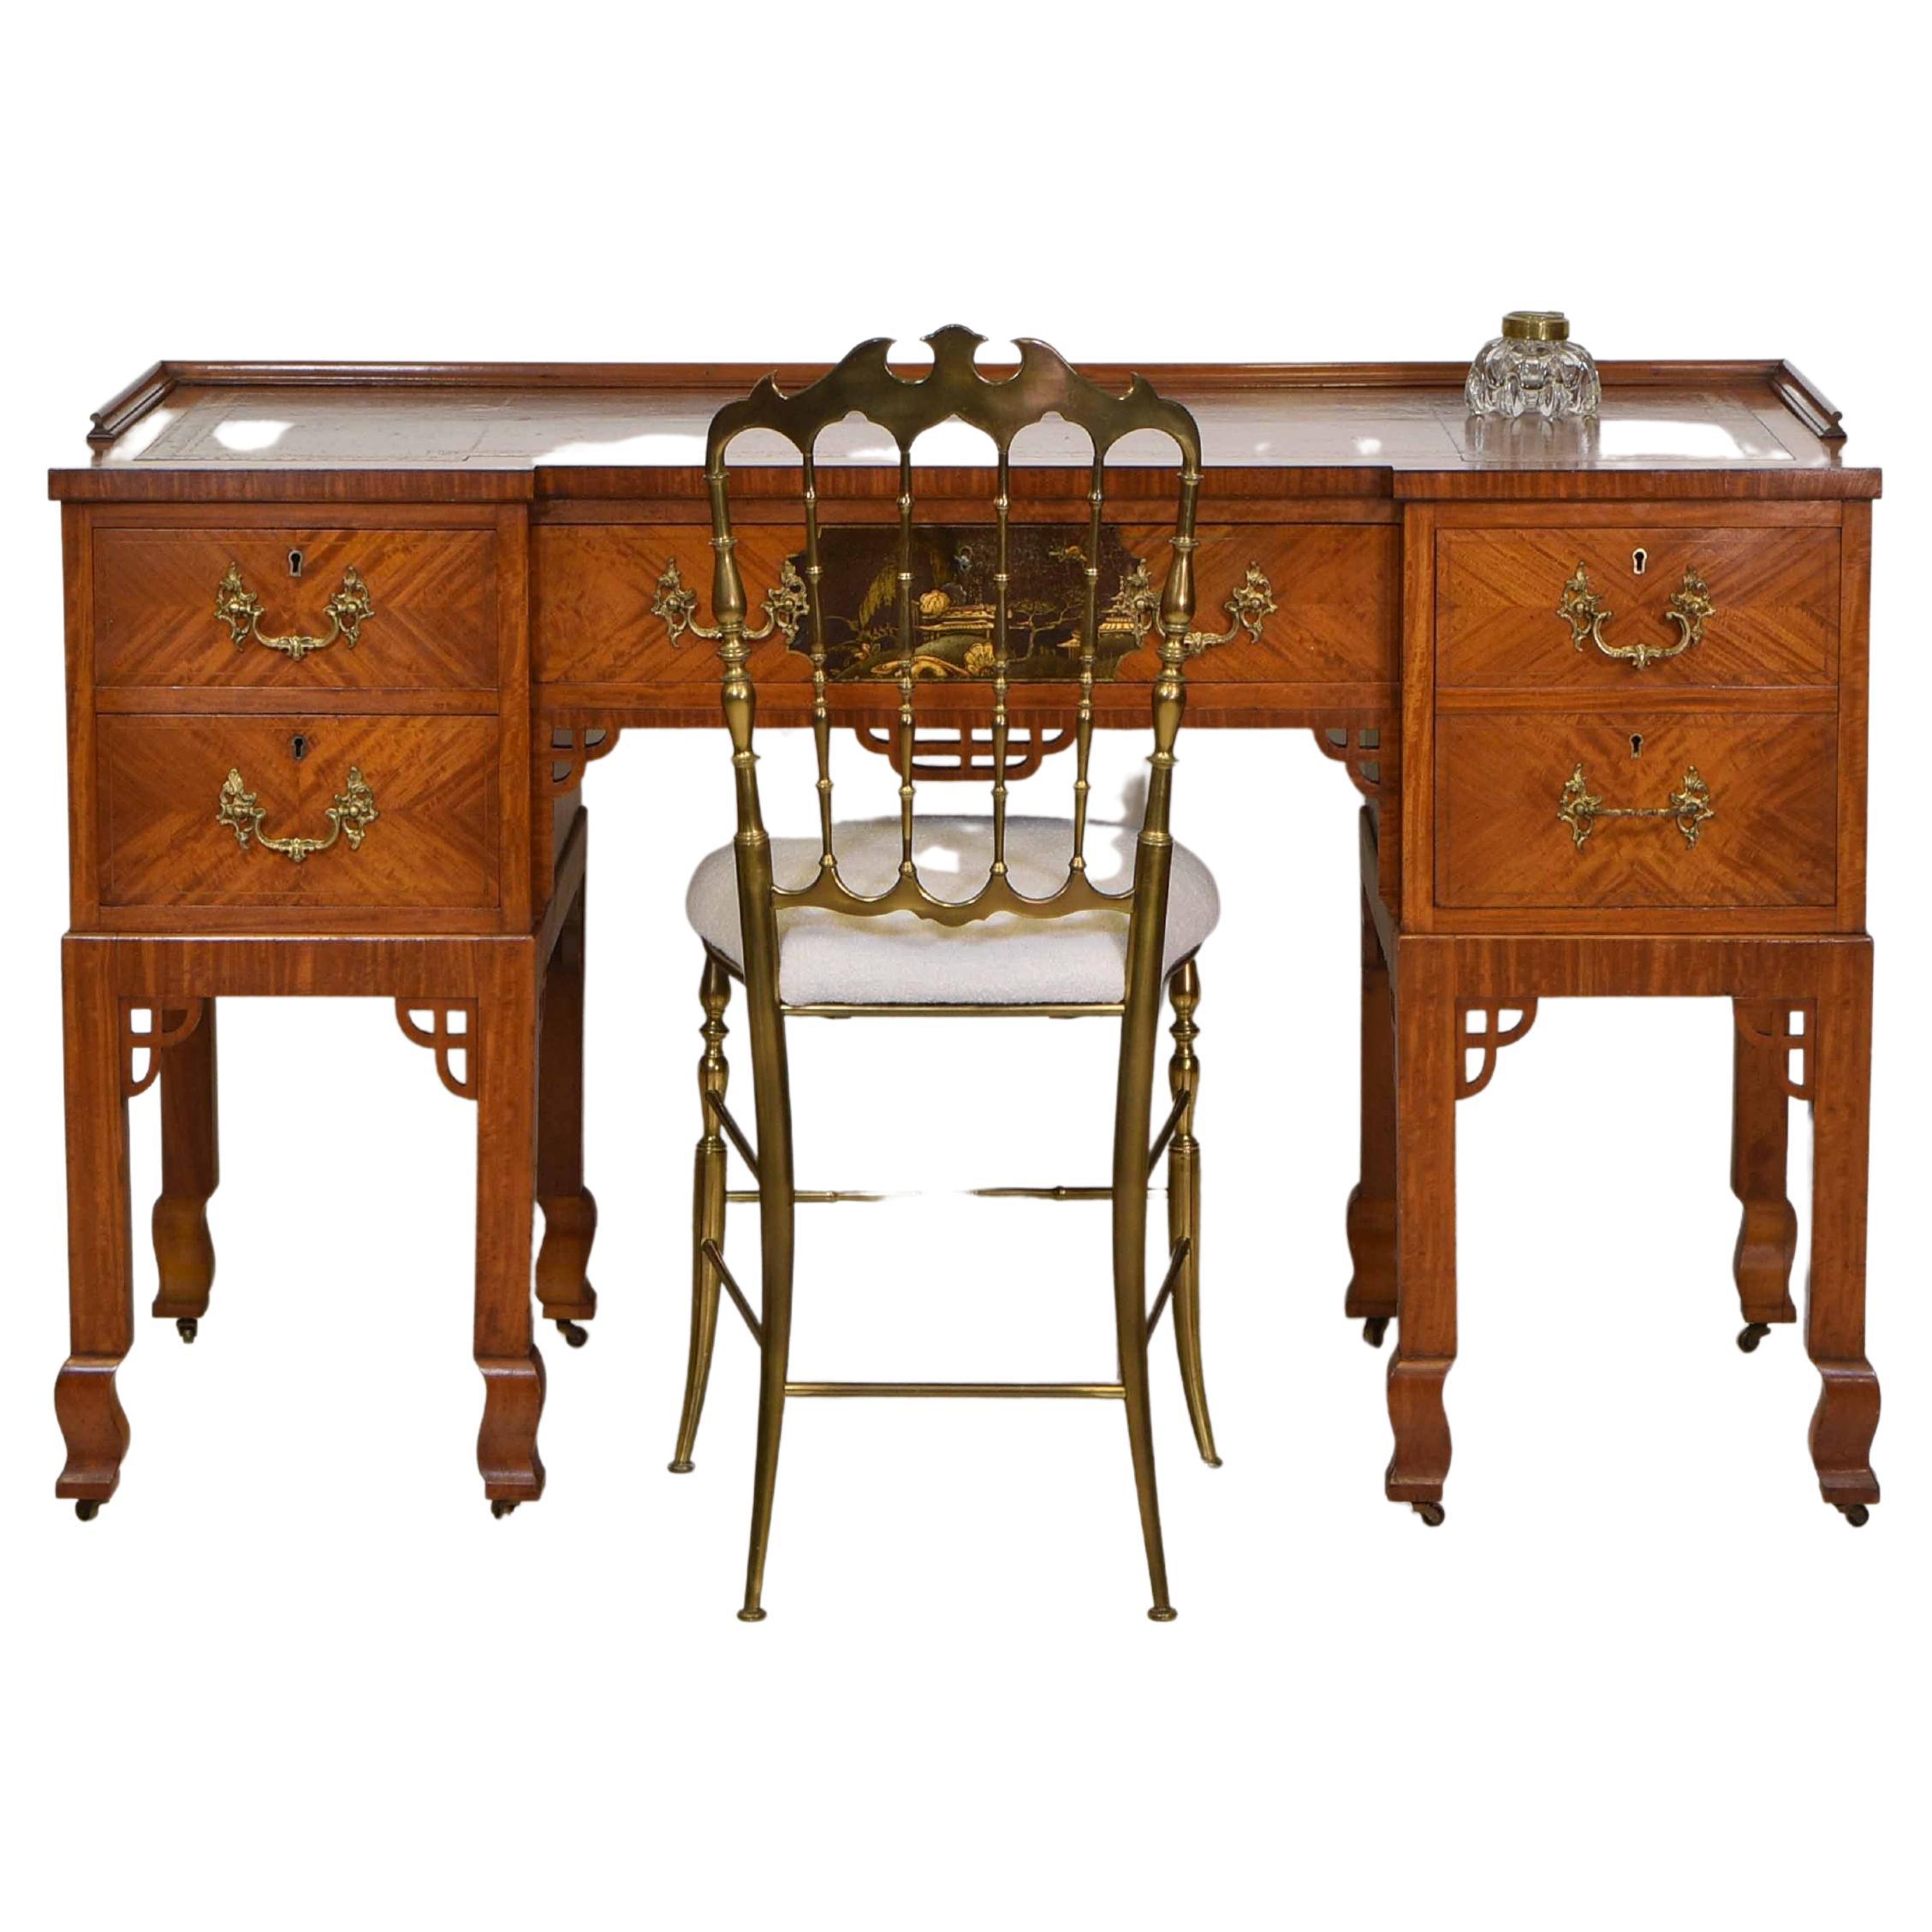 Leather Antique English Satinwood Desk in the Japanese Manner circa 1900 For Sale